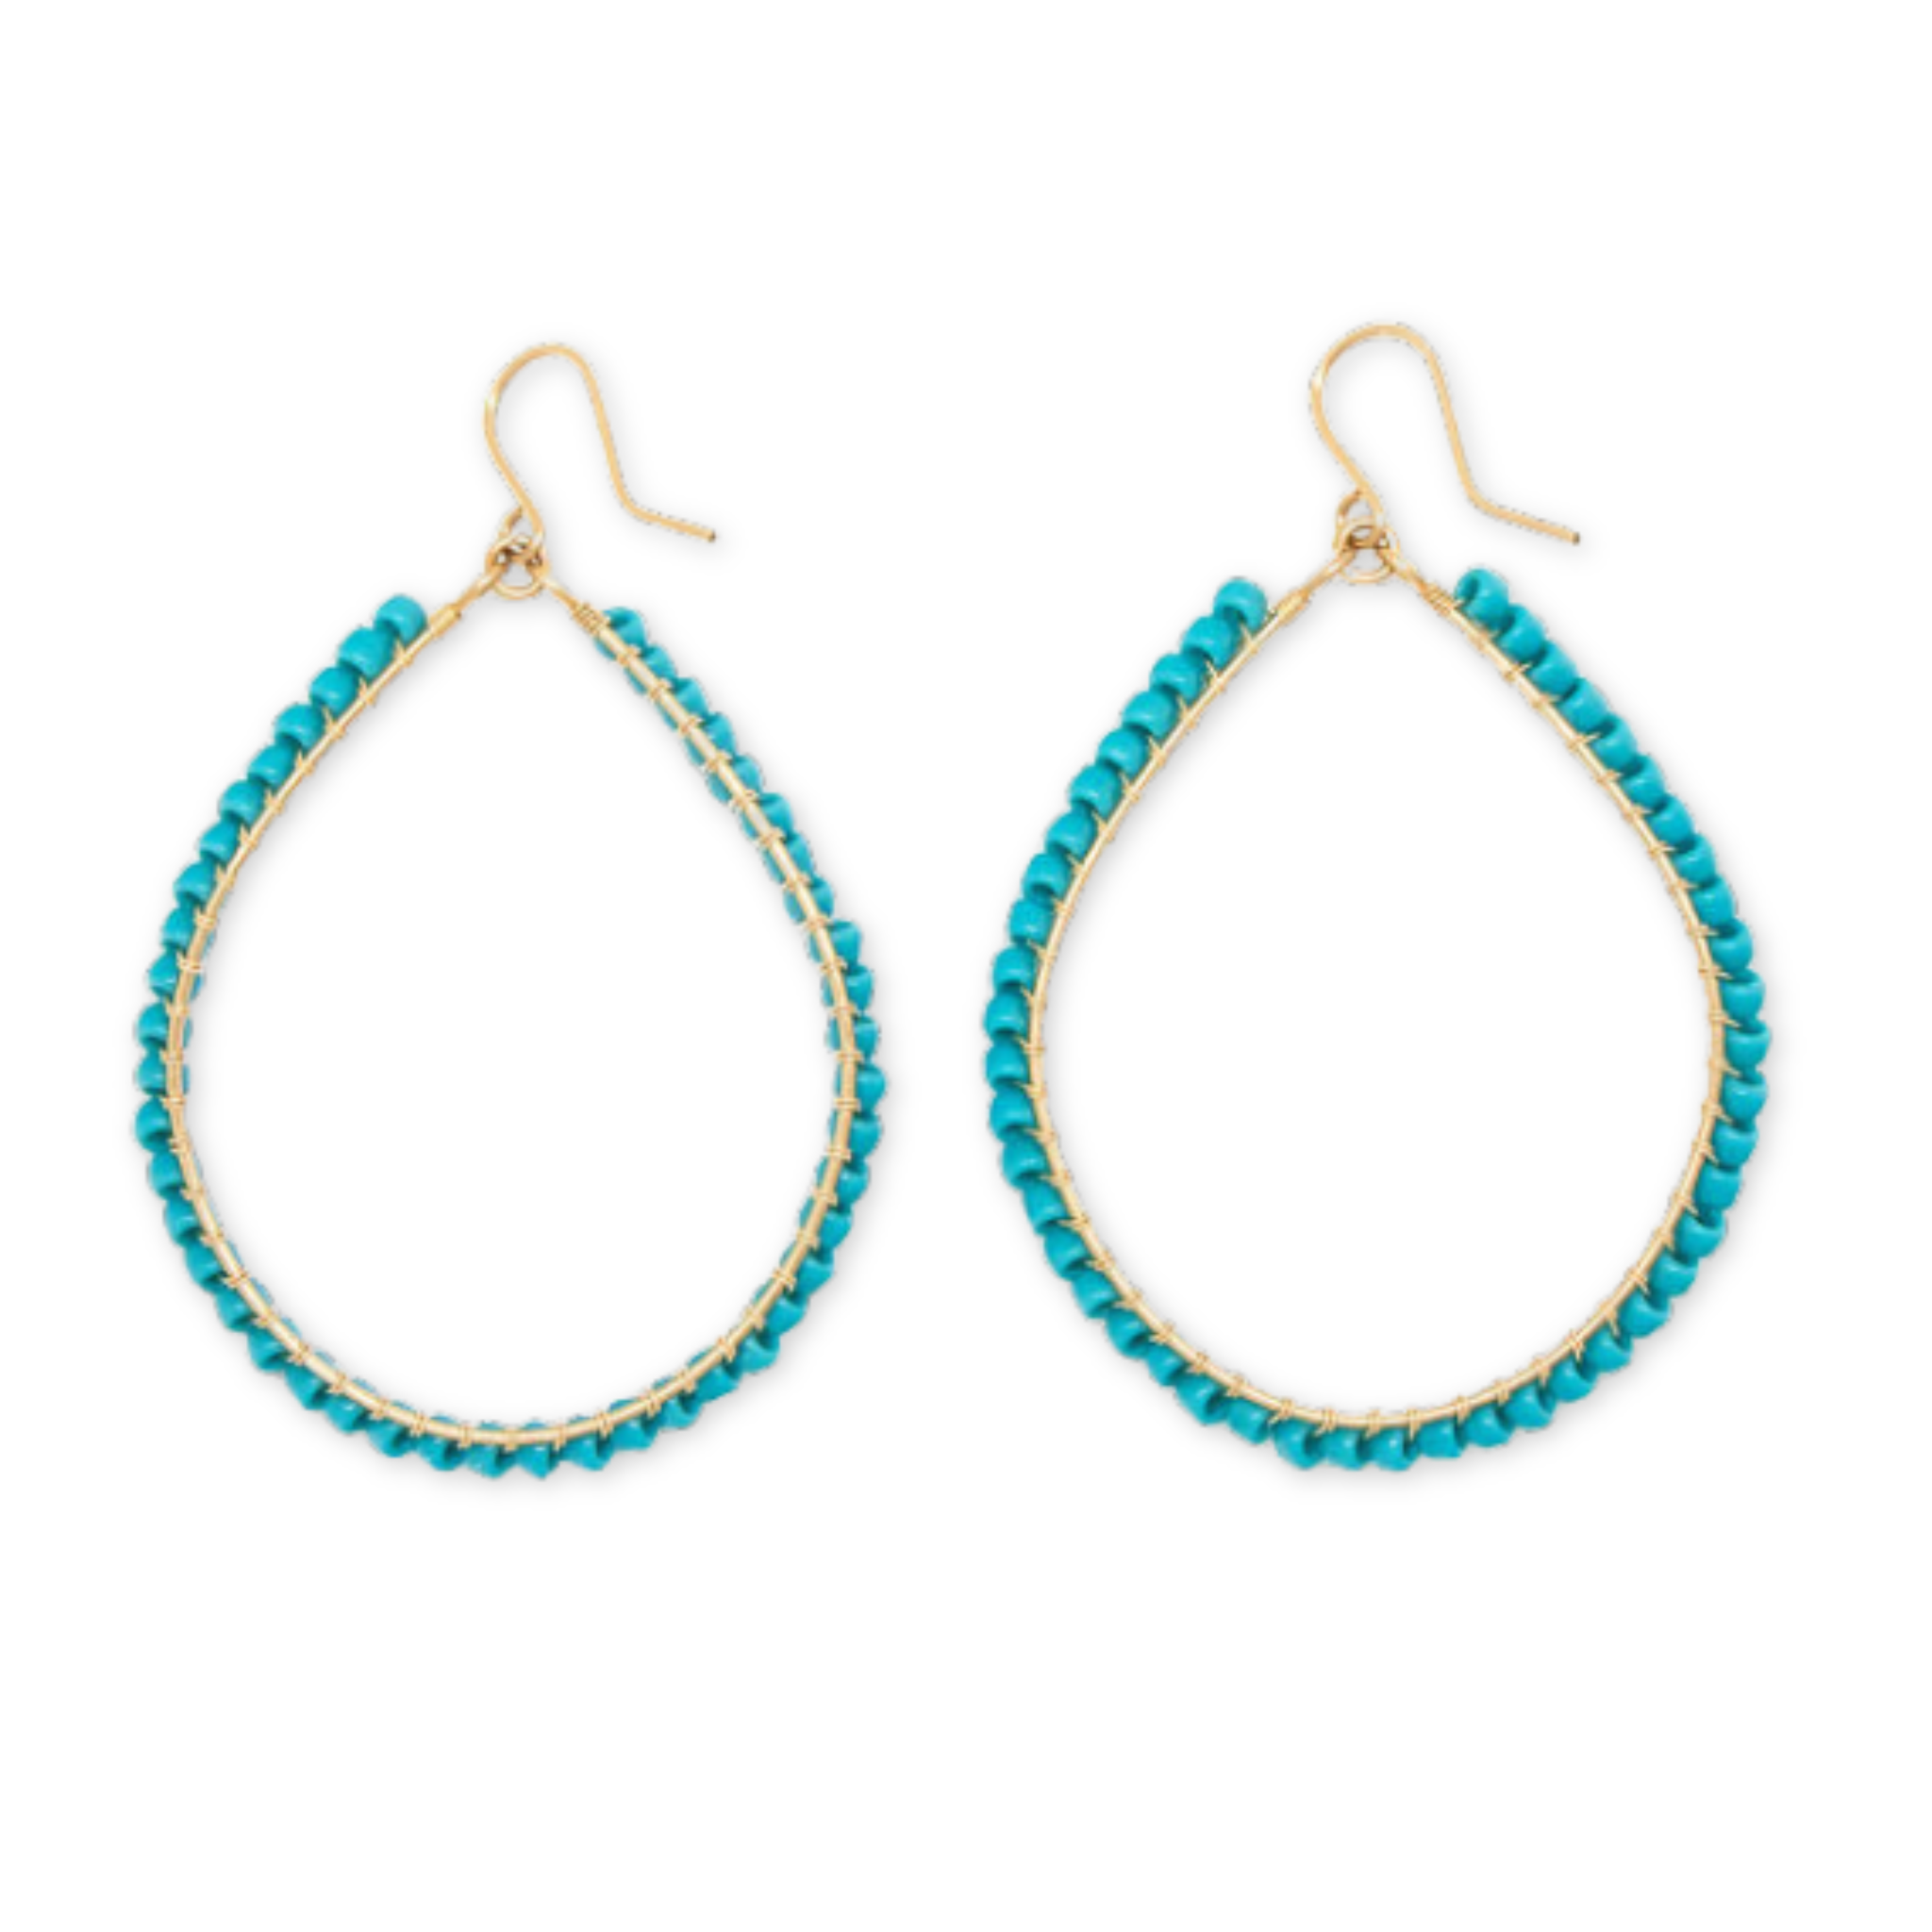 teardrop shaped hoops with turquoise beads